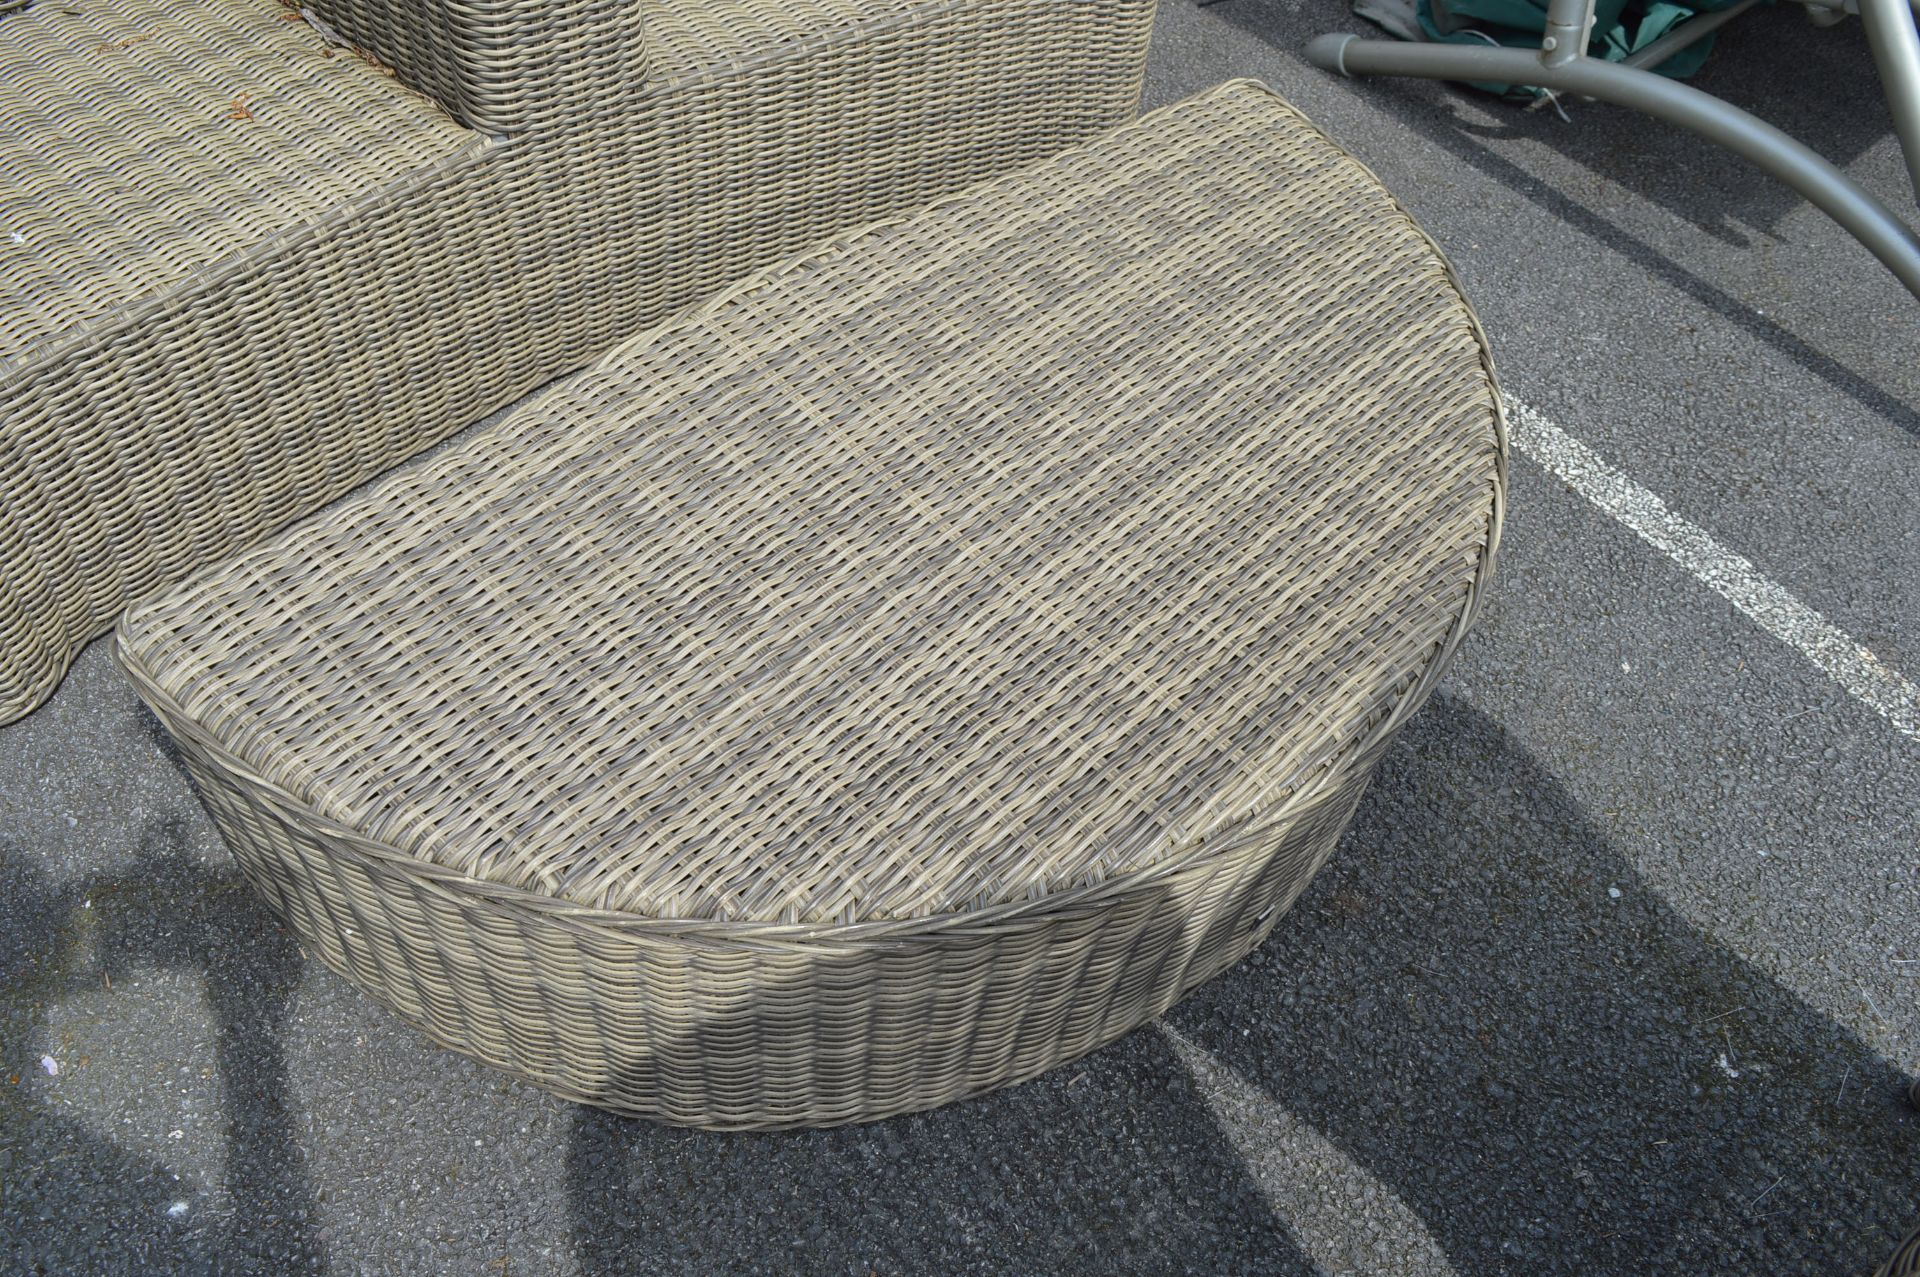 Two Seat Patio Sofa and Semicircular Coffee Table - Image 2 of 2